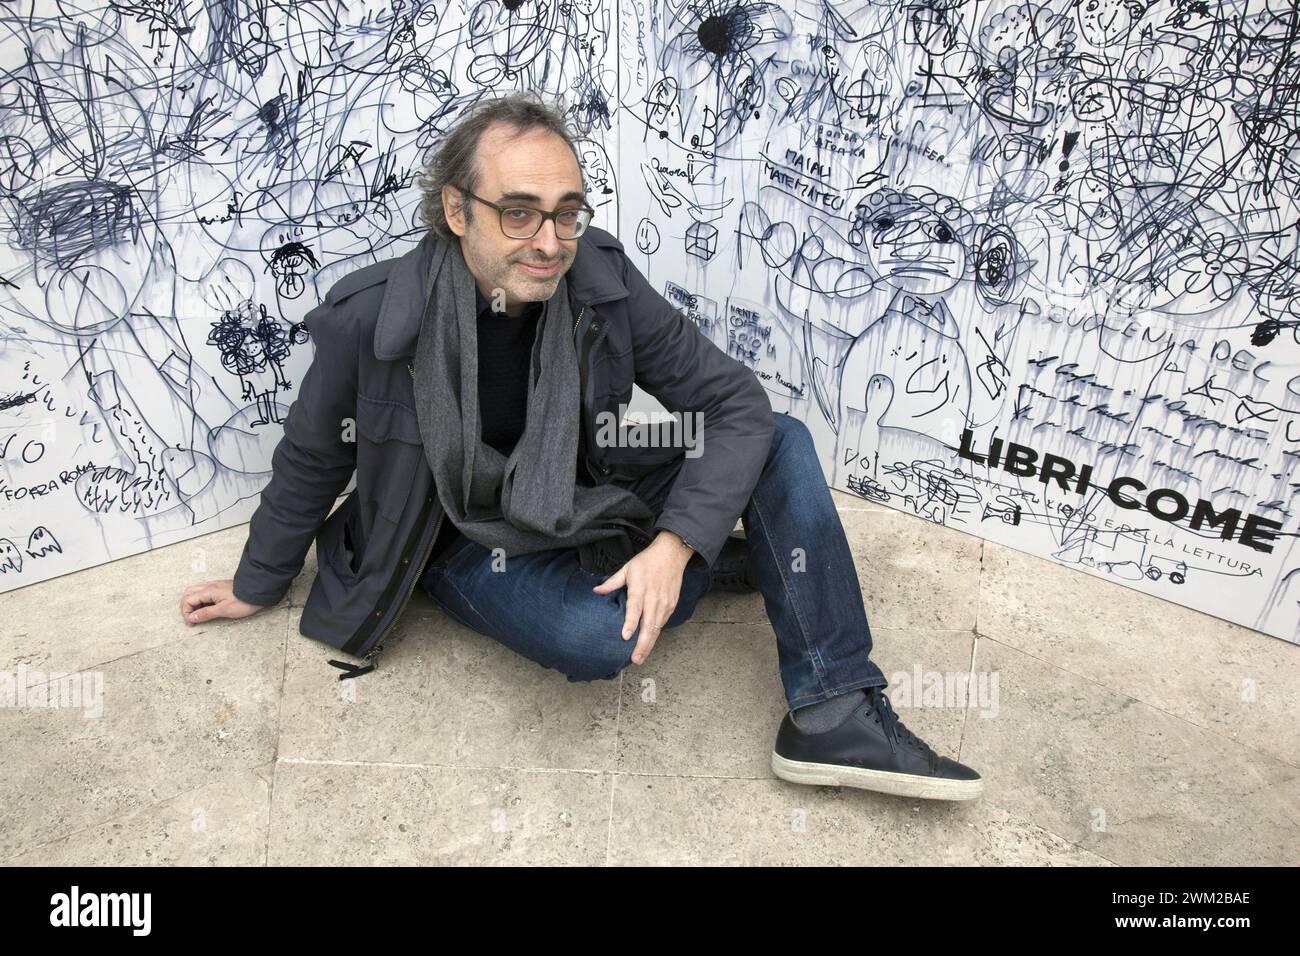 MME4814796 American writer Gary Shteyngart/Lo scrittoreamericano Gary Shteyngart -; (add.info.: American writer Gary Shteyngart/Lo scrittoreamericano Gary Shteyngart -); © Marcello Mencarini. All rights reserved 2024. Stock Photo